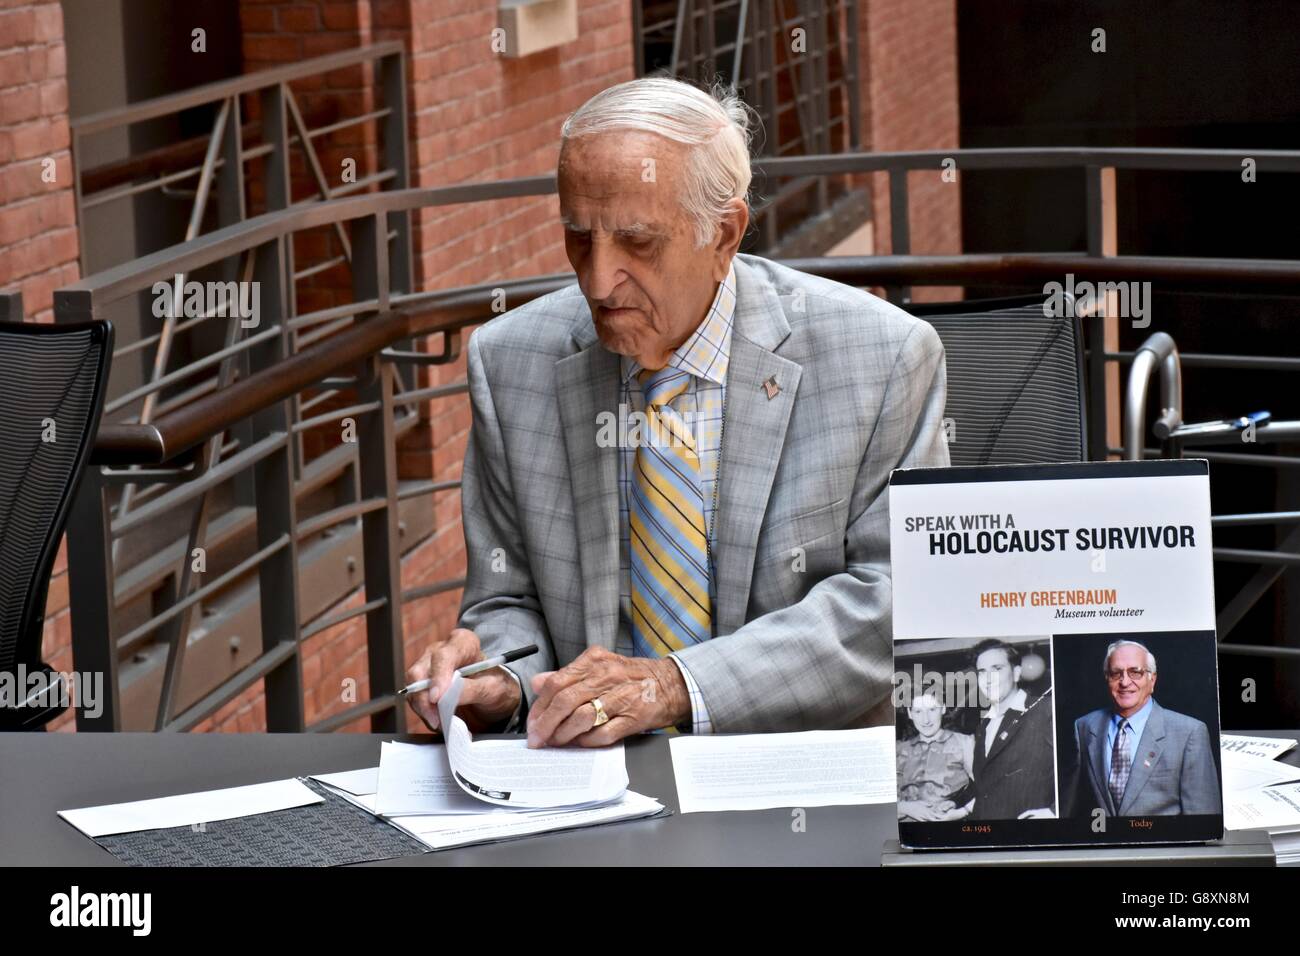 A survivor from the holocaust in Germany signing autographs and handing out his book at the holocaust museum in DC Stock Photo